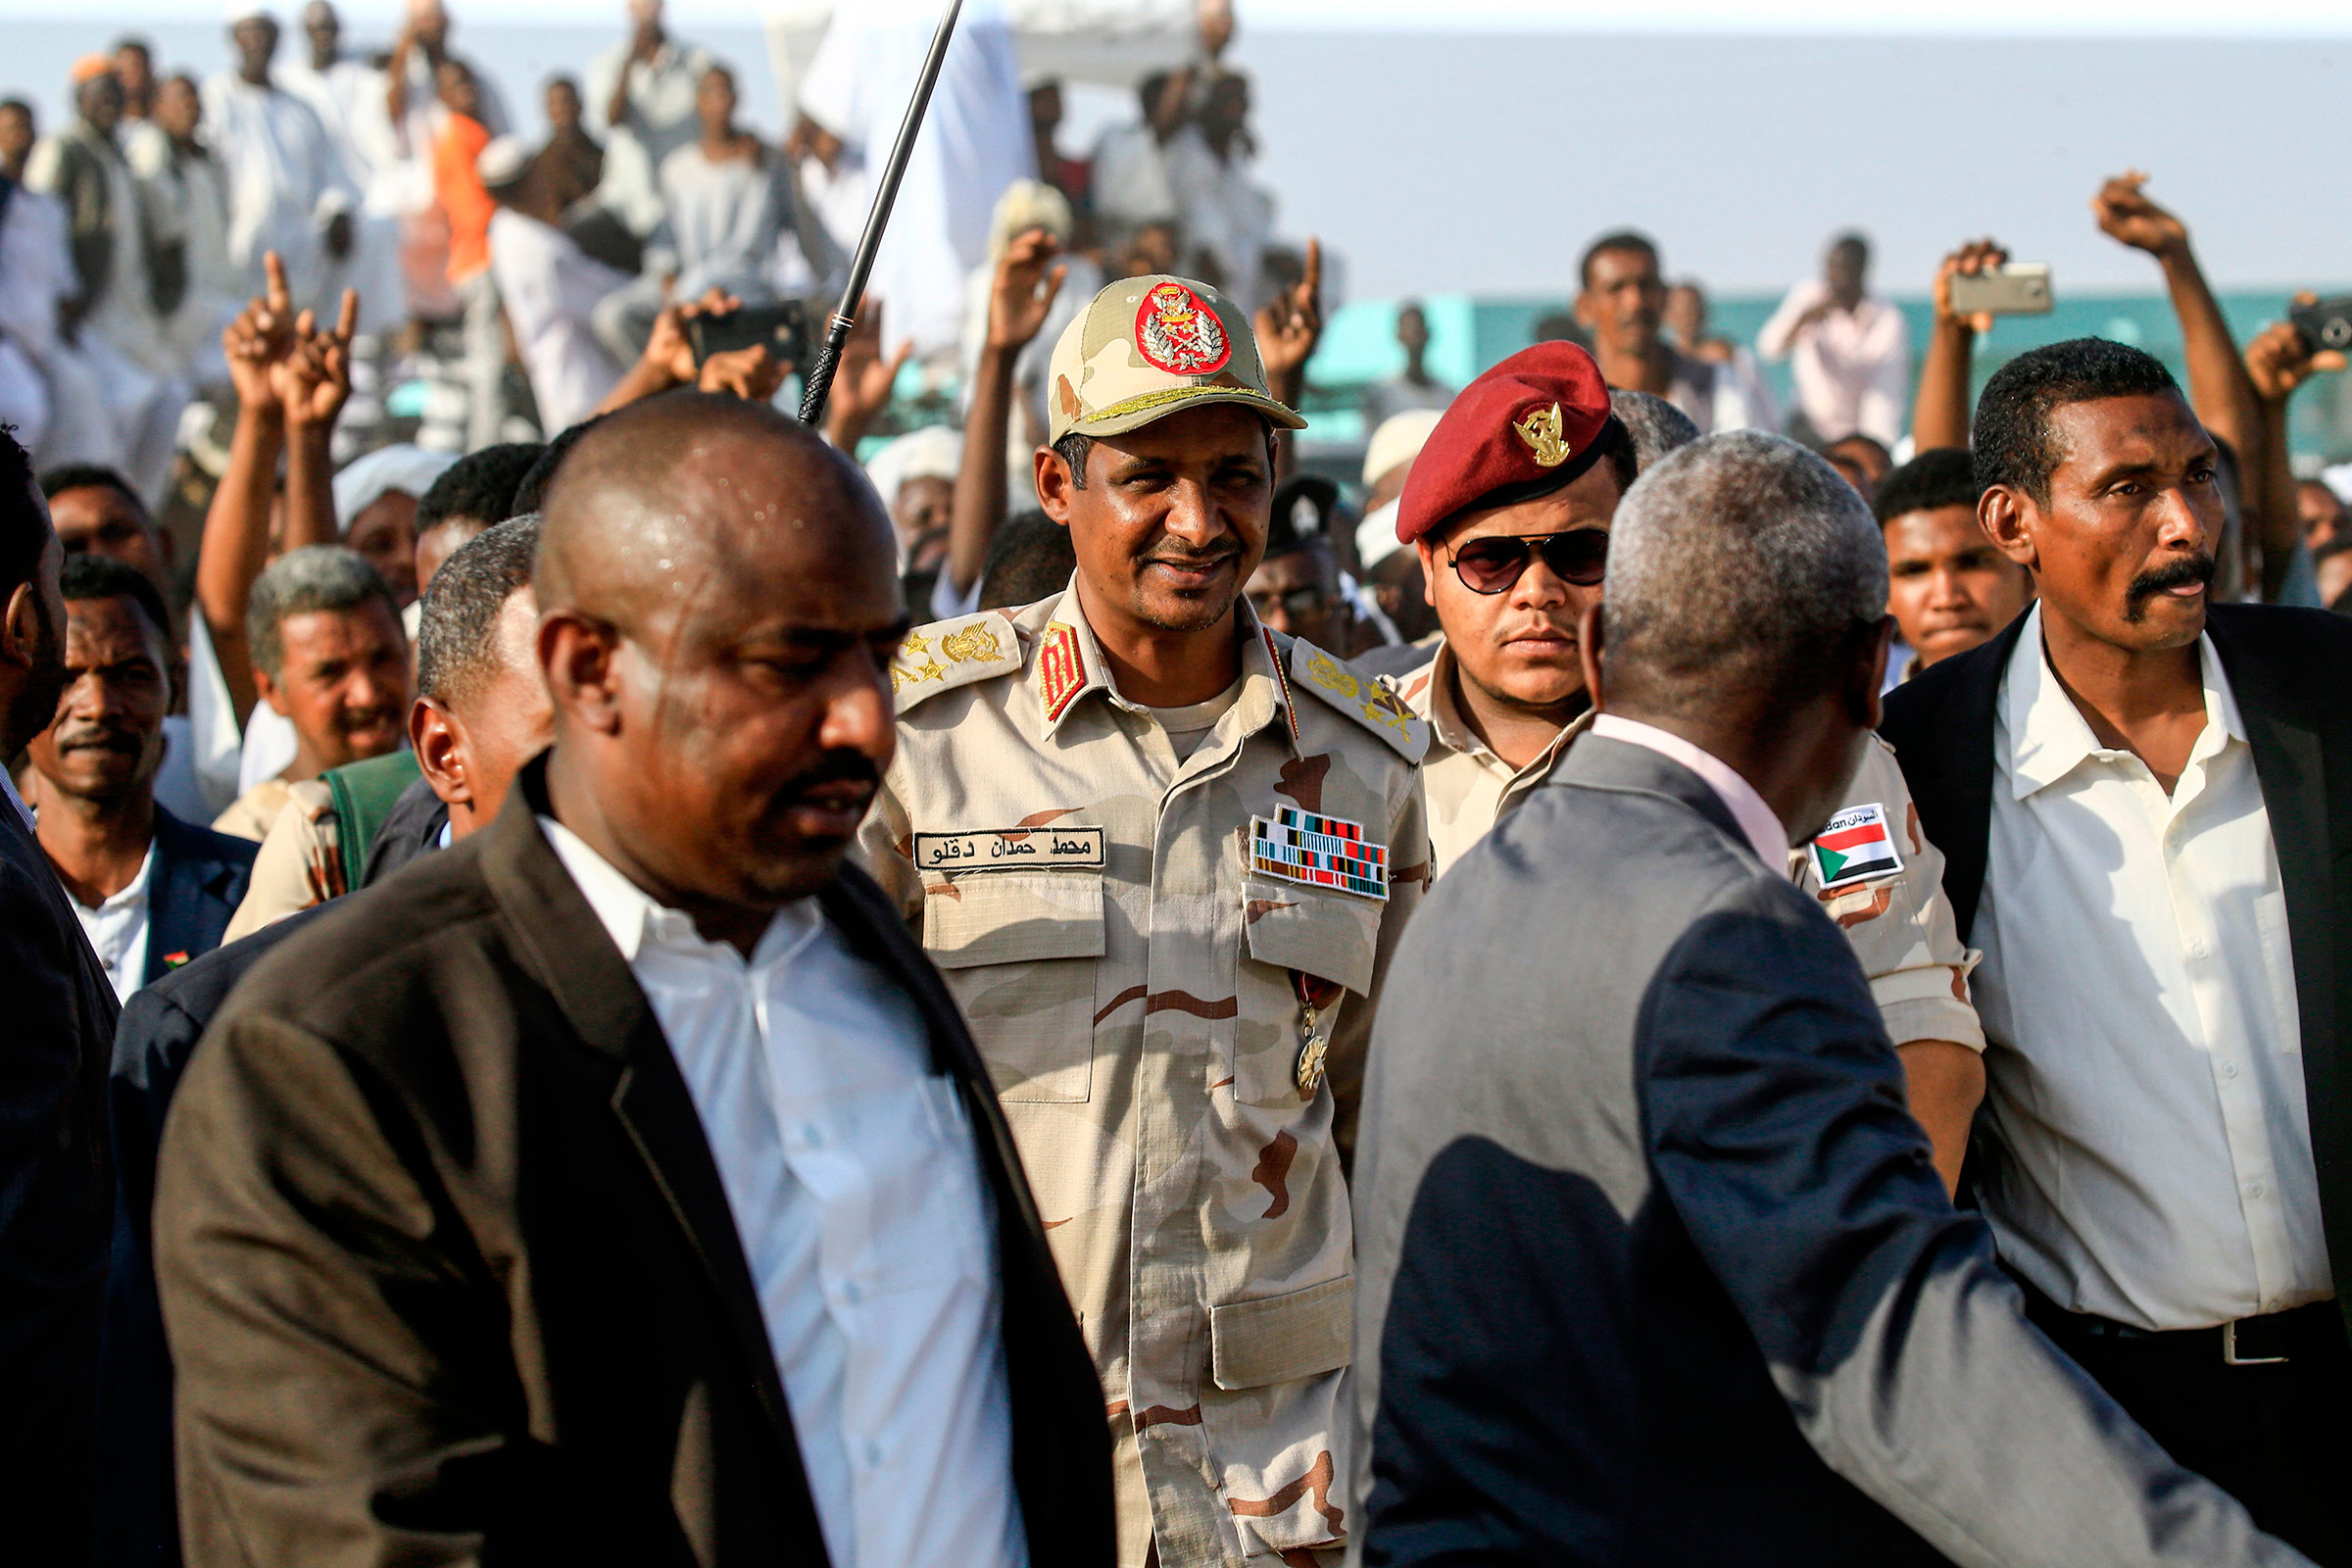 Mohamed Hamdan Dagalo, center, the deputy head of Sudan's ruling Transitional Military Council and commander of the Rapid Support Forces paramilitaries, walks in the village of Qarri, on June 15. (Ashraf Shazly—AFP/Getty Images)